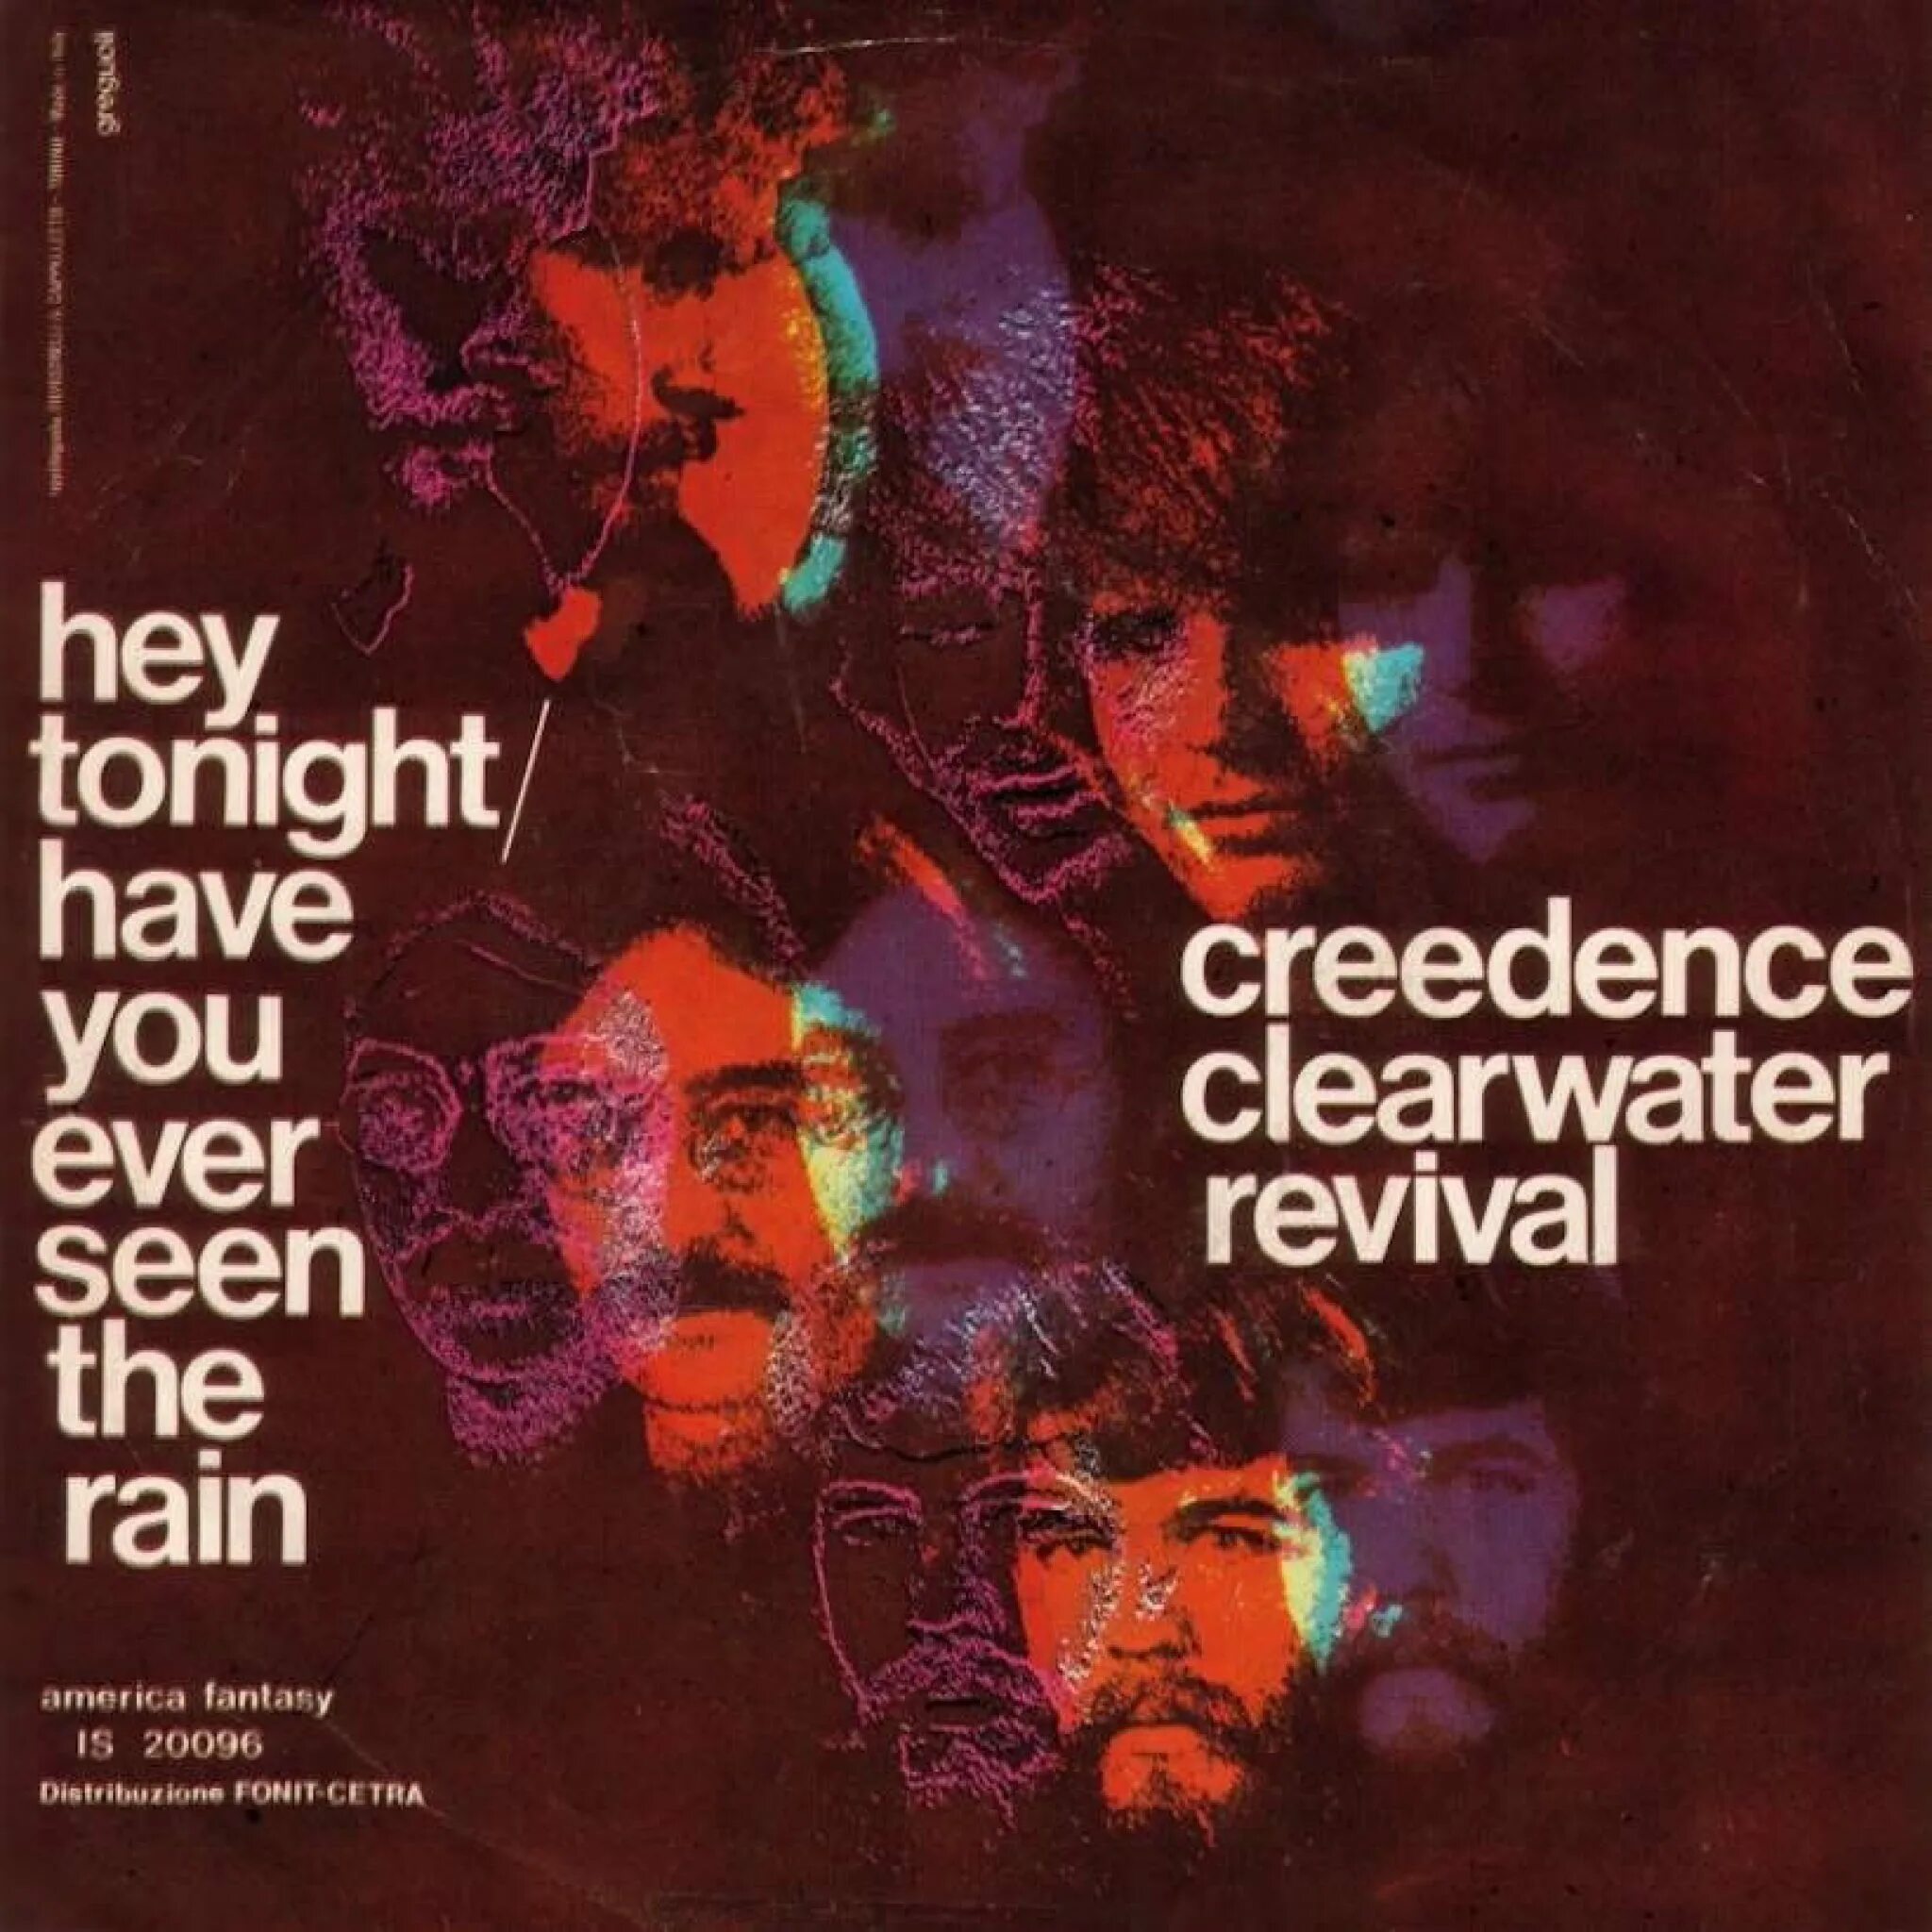 Creedence Clearwater Revival. Creedence Clearwater Revival - have you ever seen the Rain. Have you ever seen the Rain Криденс. Creedence Clearwater Revival - have you ever seen the Rain (1970). Creedence clearwater rain